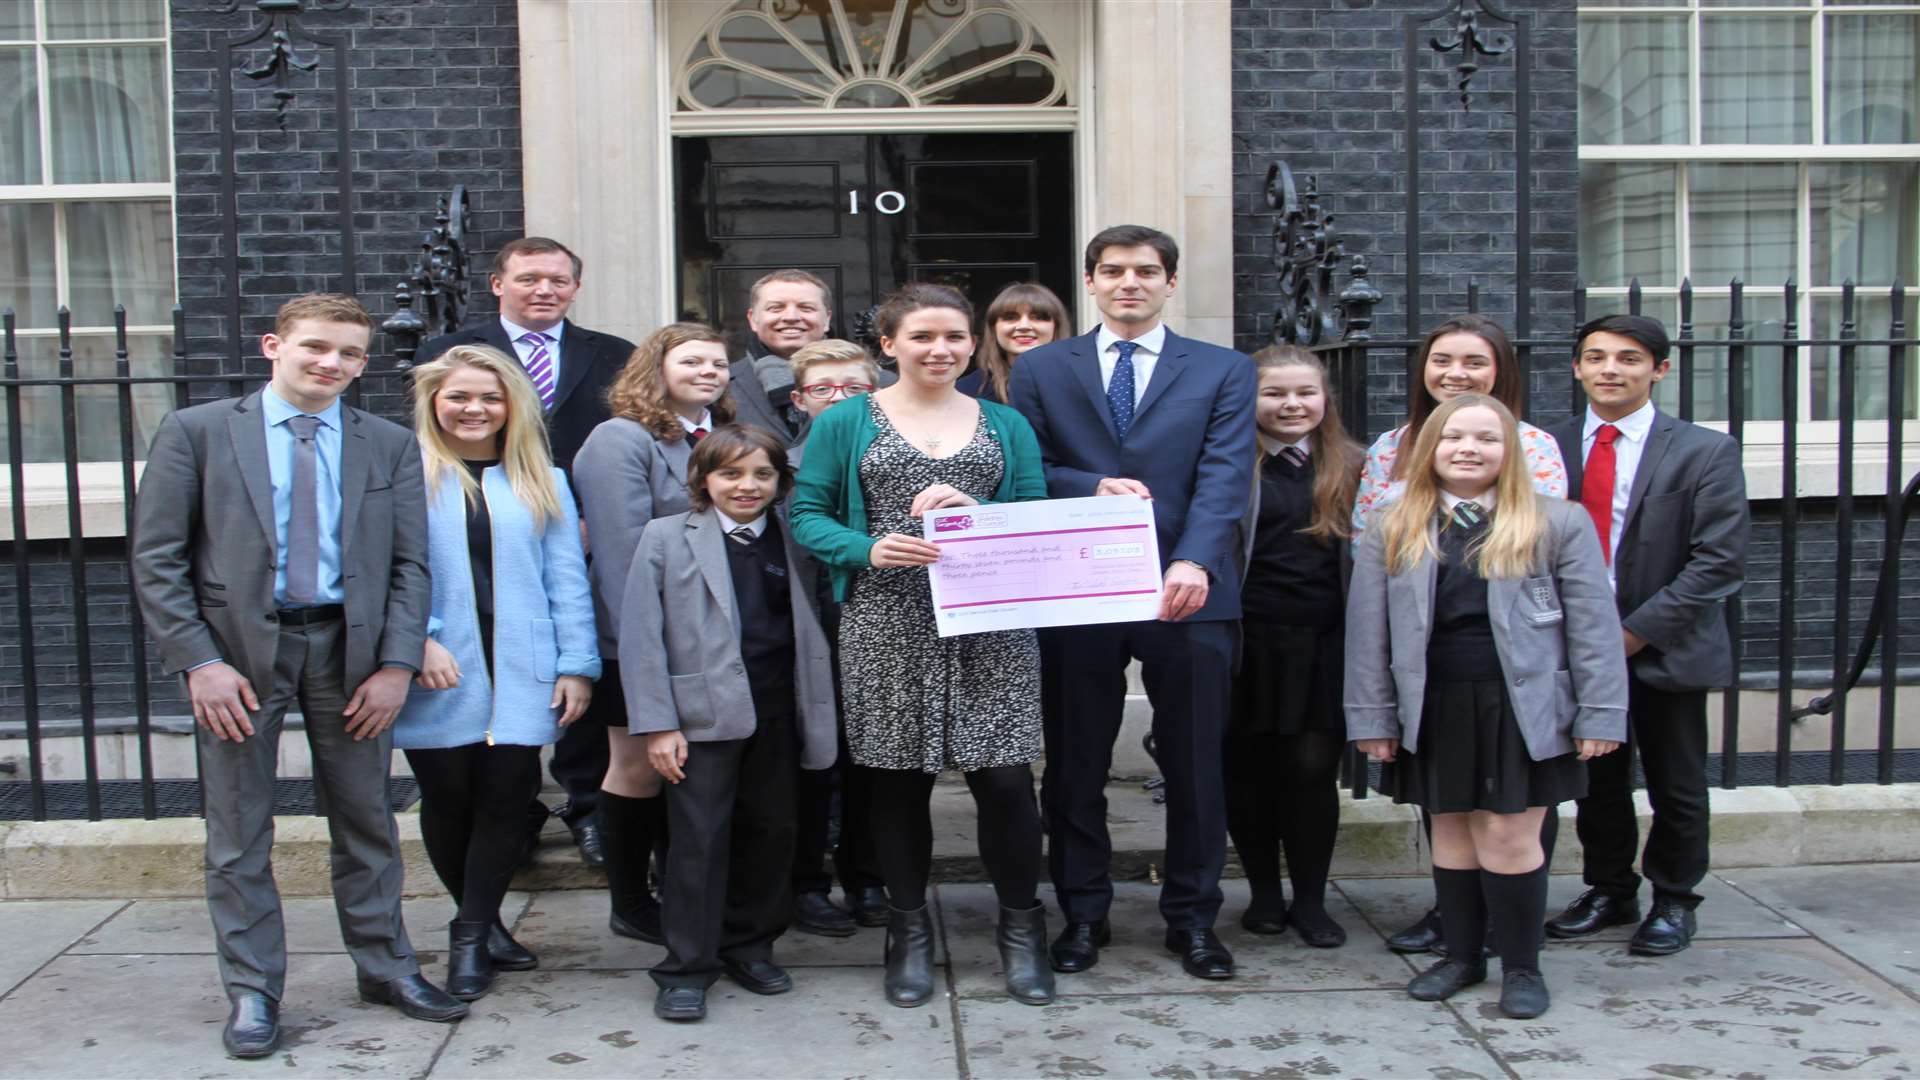 The youngsters outside Number 10 as part of their Westminster Wig Wiggle met up with Damian Collins MP (back left). Picture: CLIC Sargent